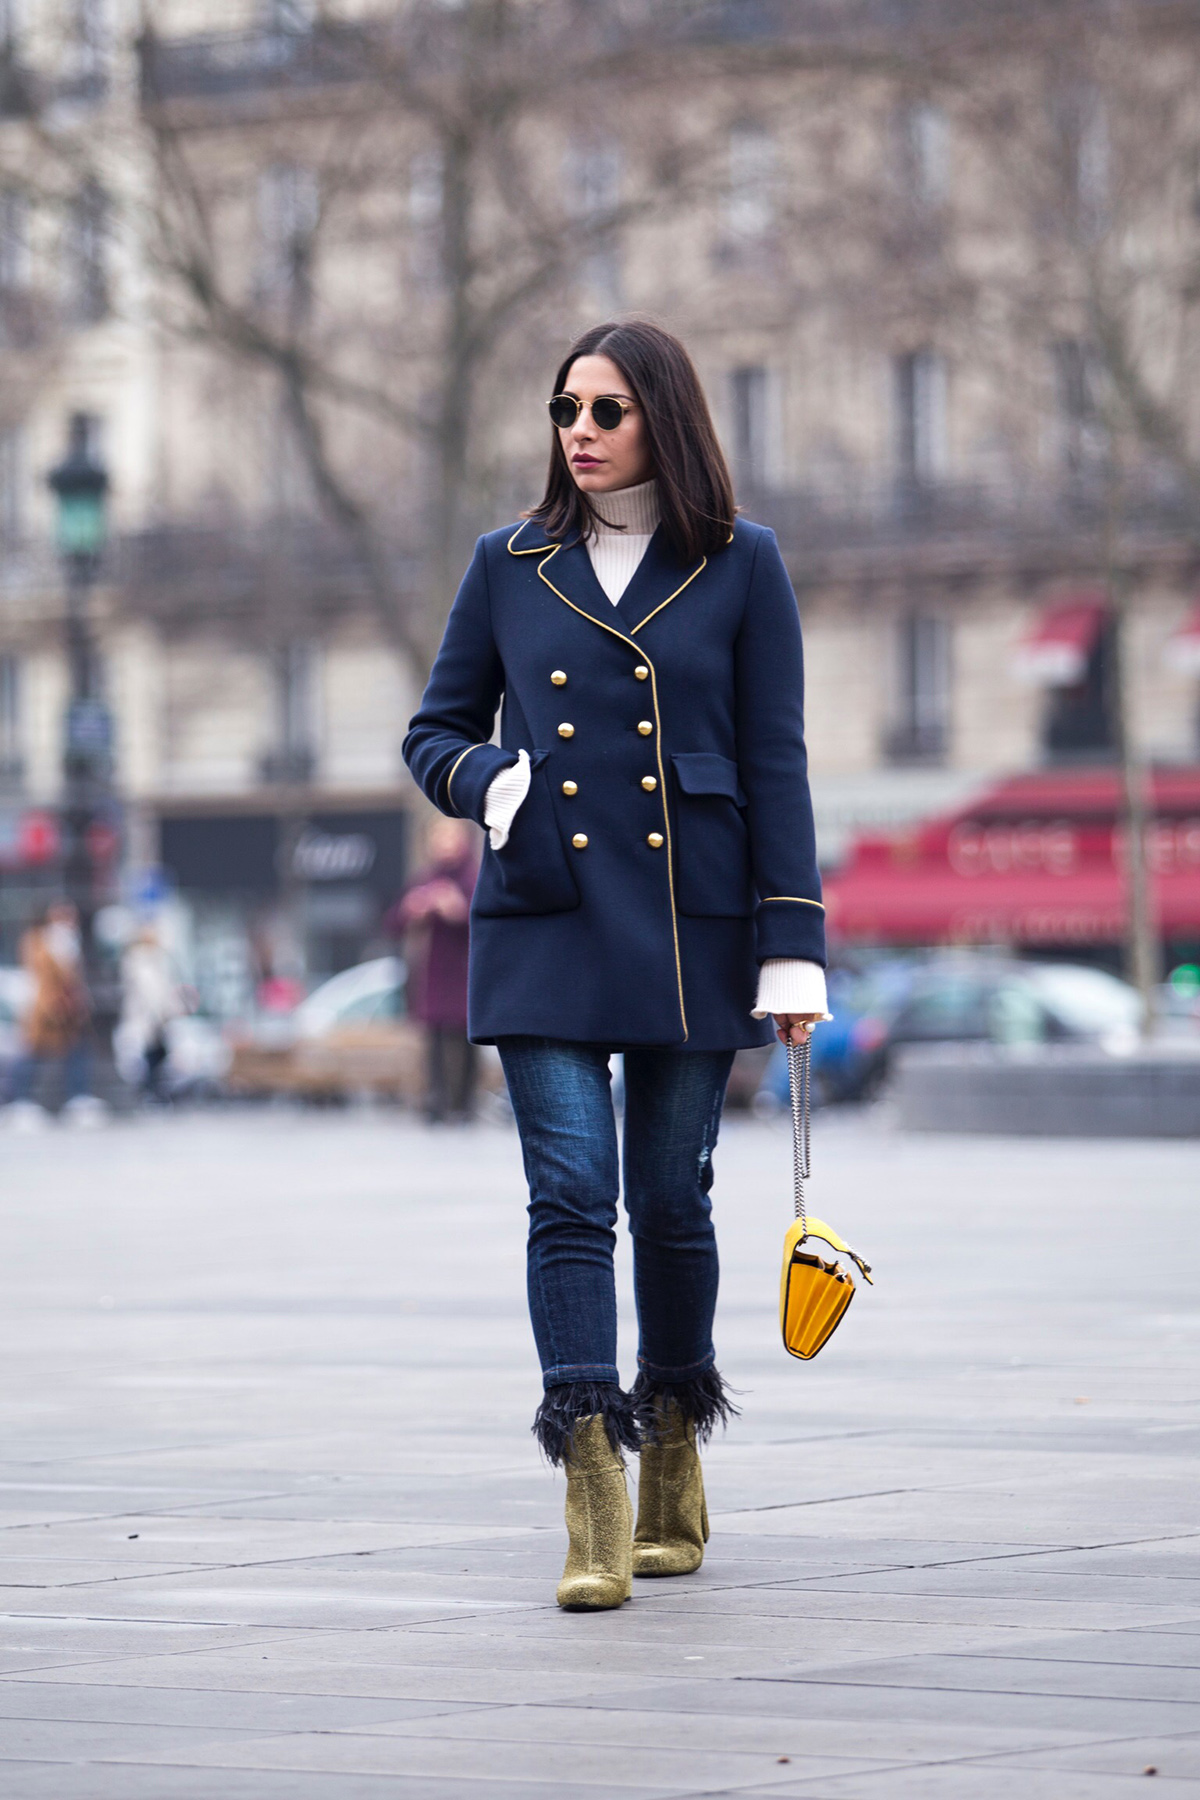 Military Coat Style by Fashion & Lifestyle blogger Stella Asteria